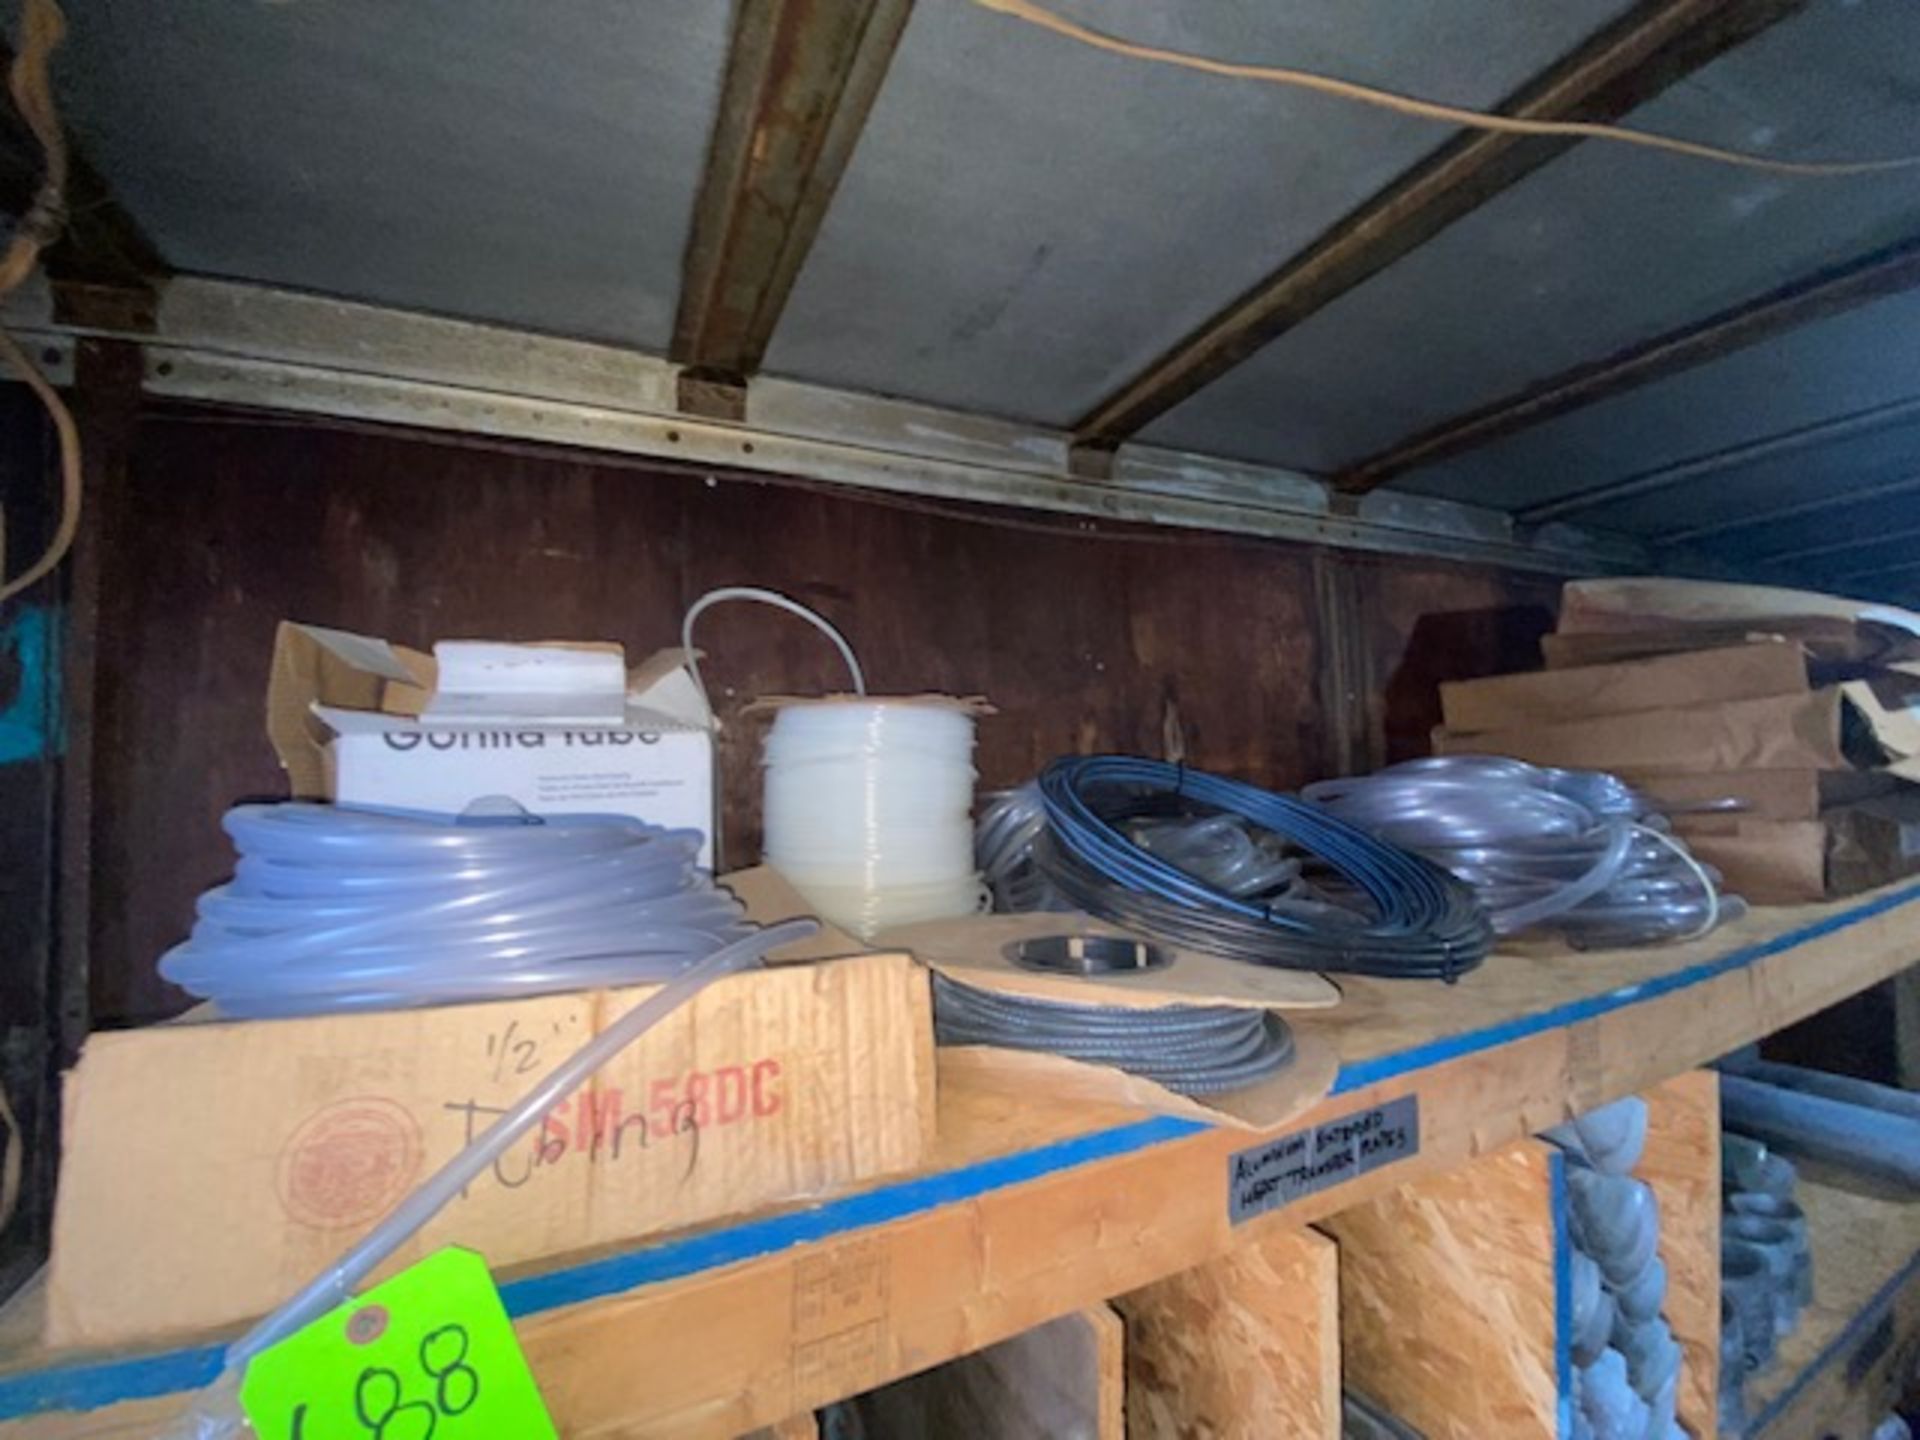 Contents of Top Shelf, Includes Assorted Rubber & Plastic Tubing (LOCATED IN MONROEVILLE, PA)